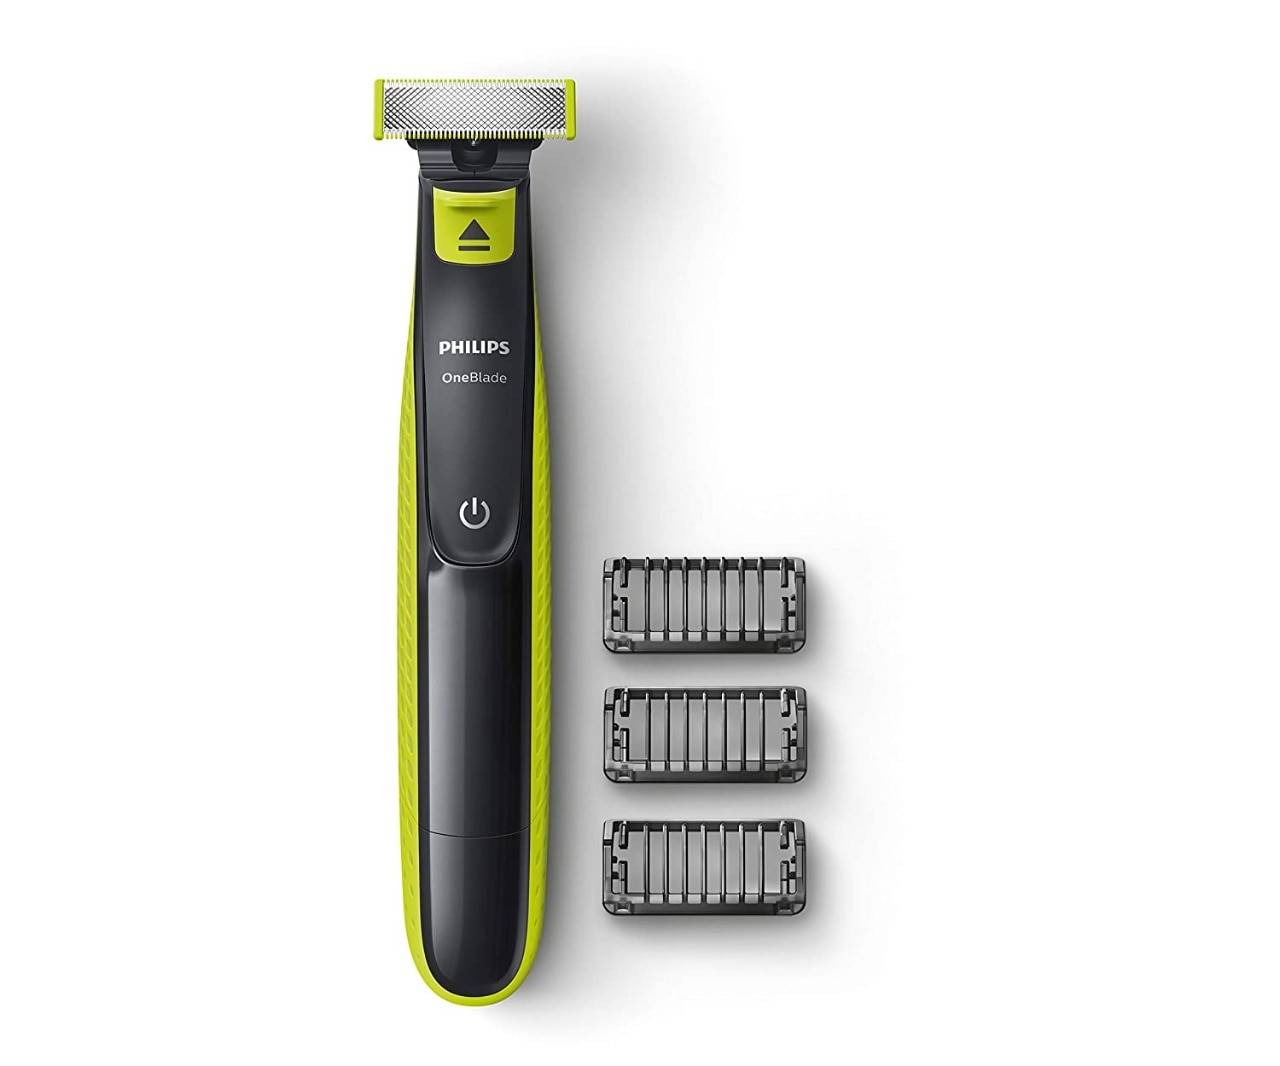 Amazon Festival Sale: Buy items like daily use hair trimmer, hair dryer and shaving trimmer in the sale, price starts from just Rs 500